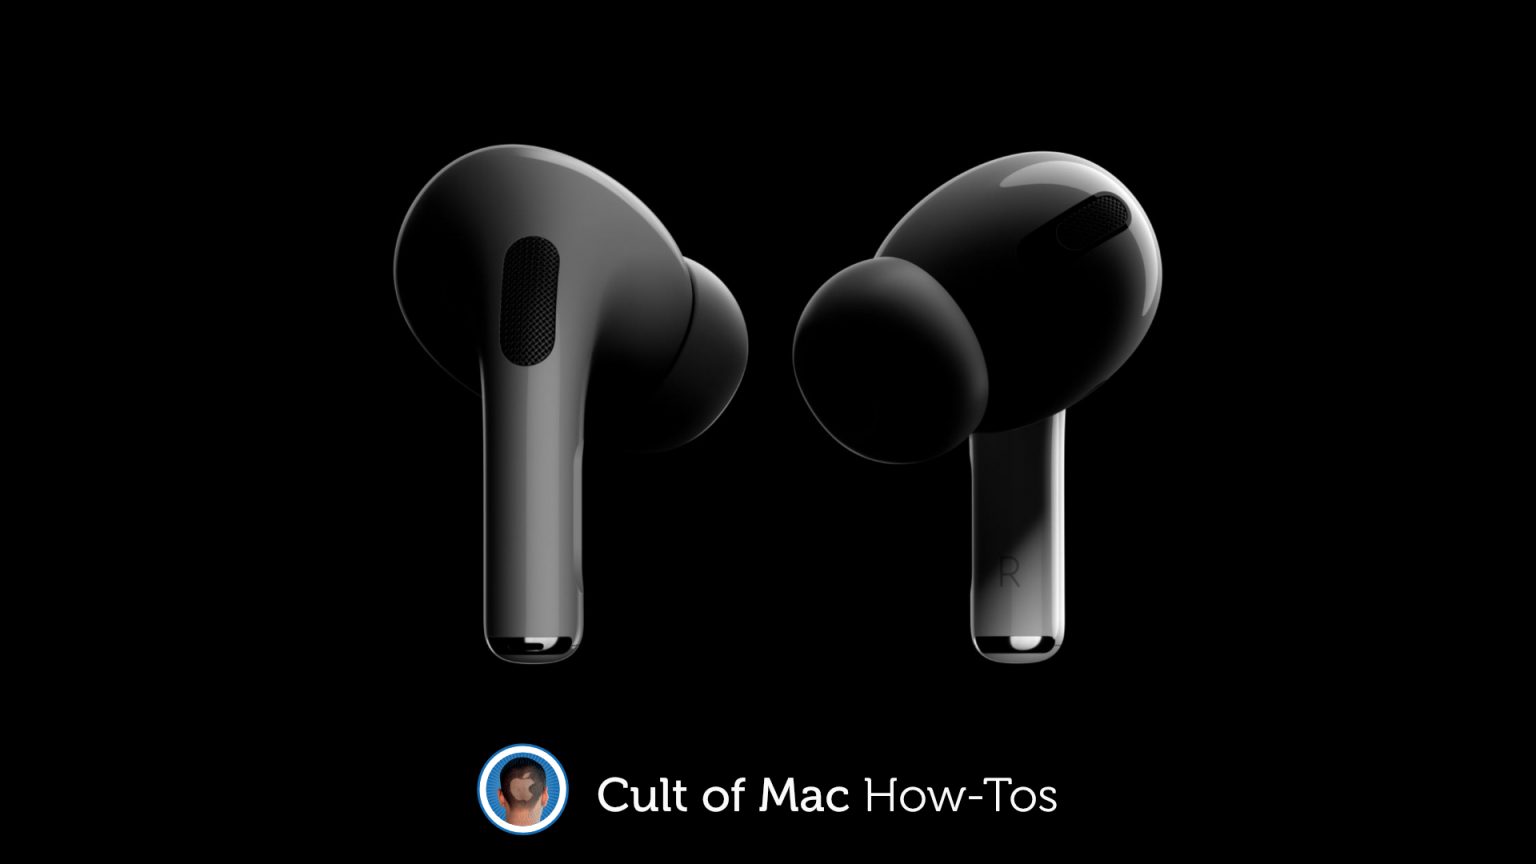 How to install AirPods Pro beta firmware